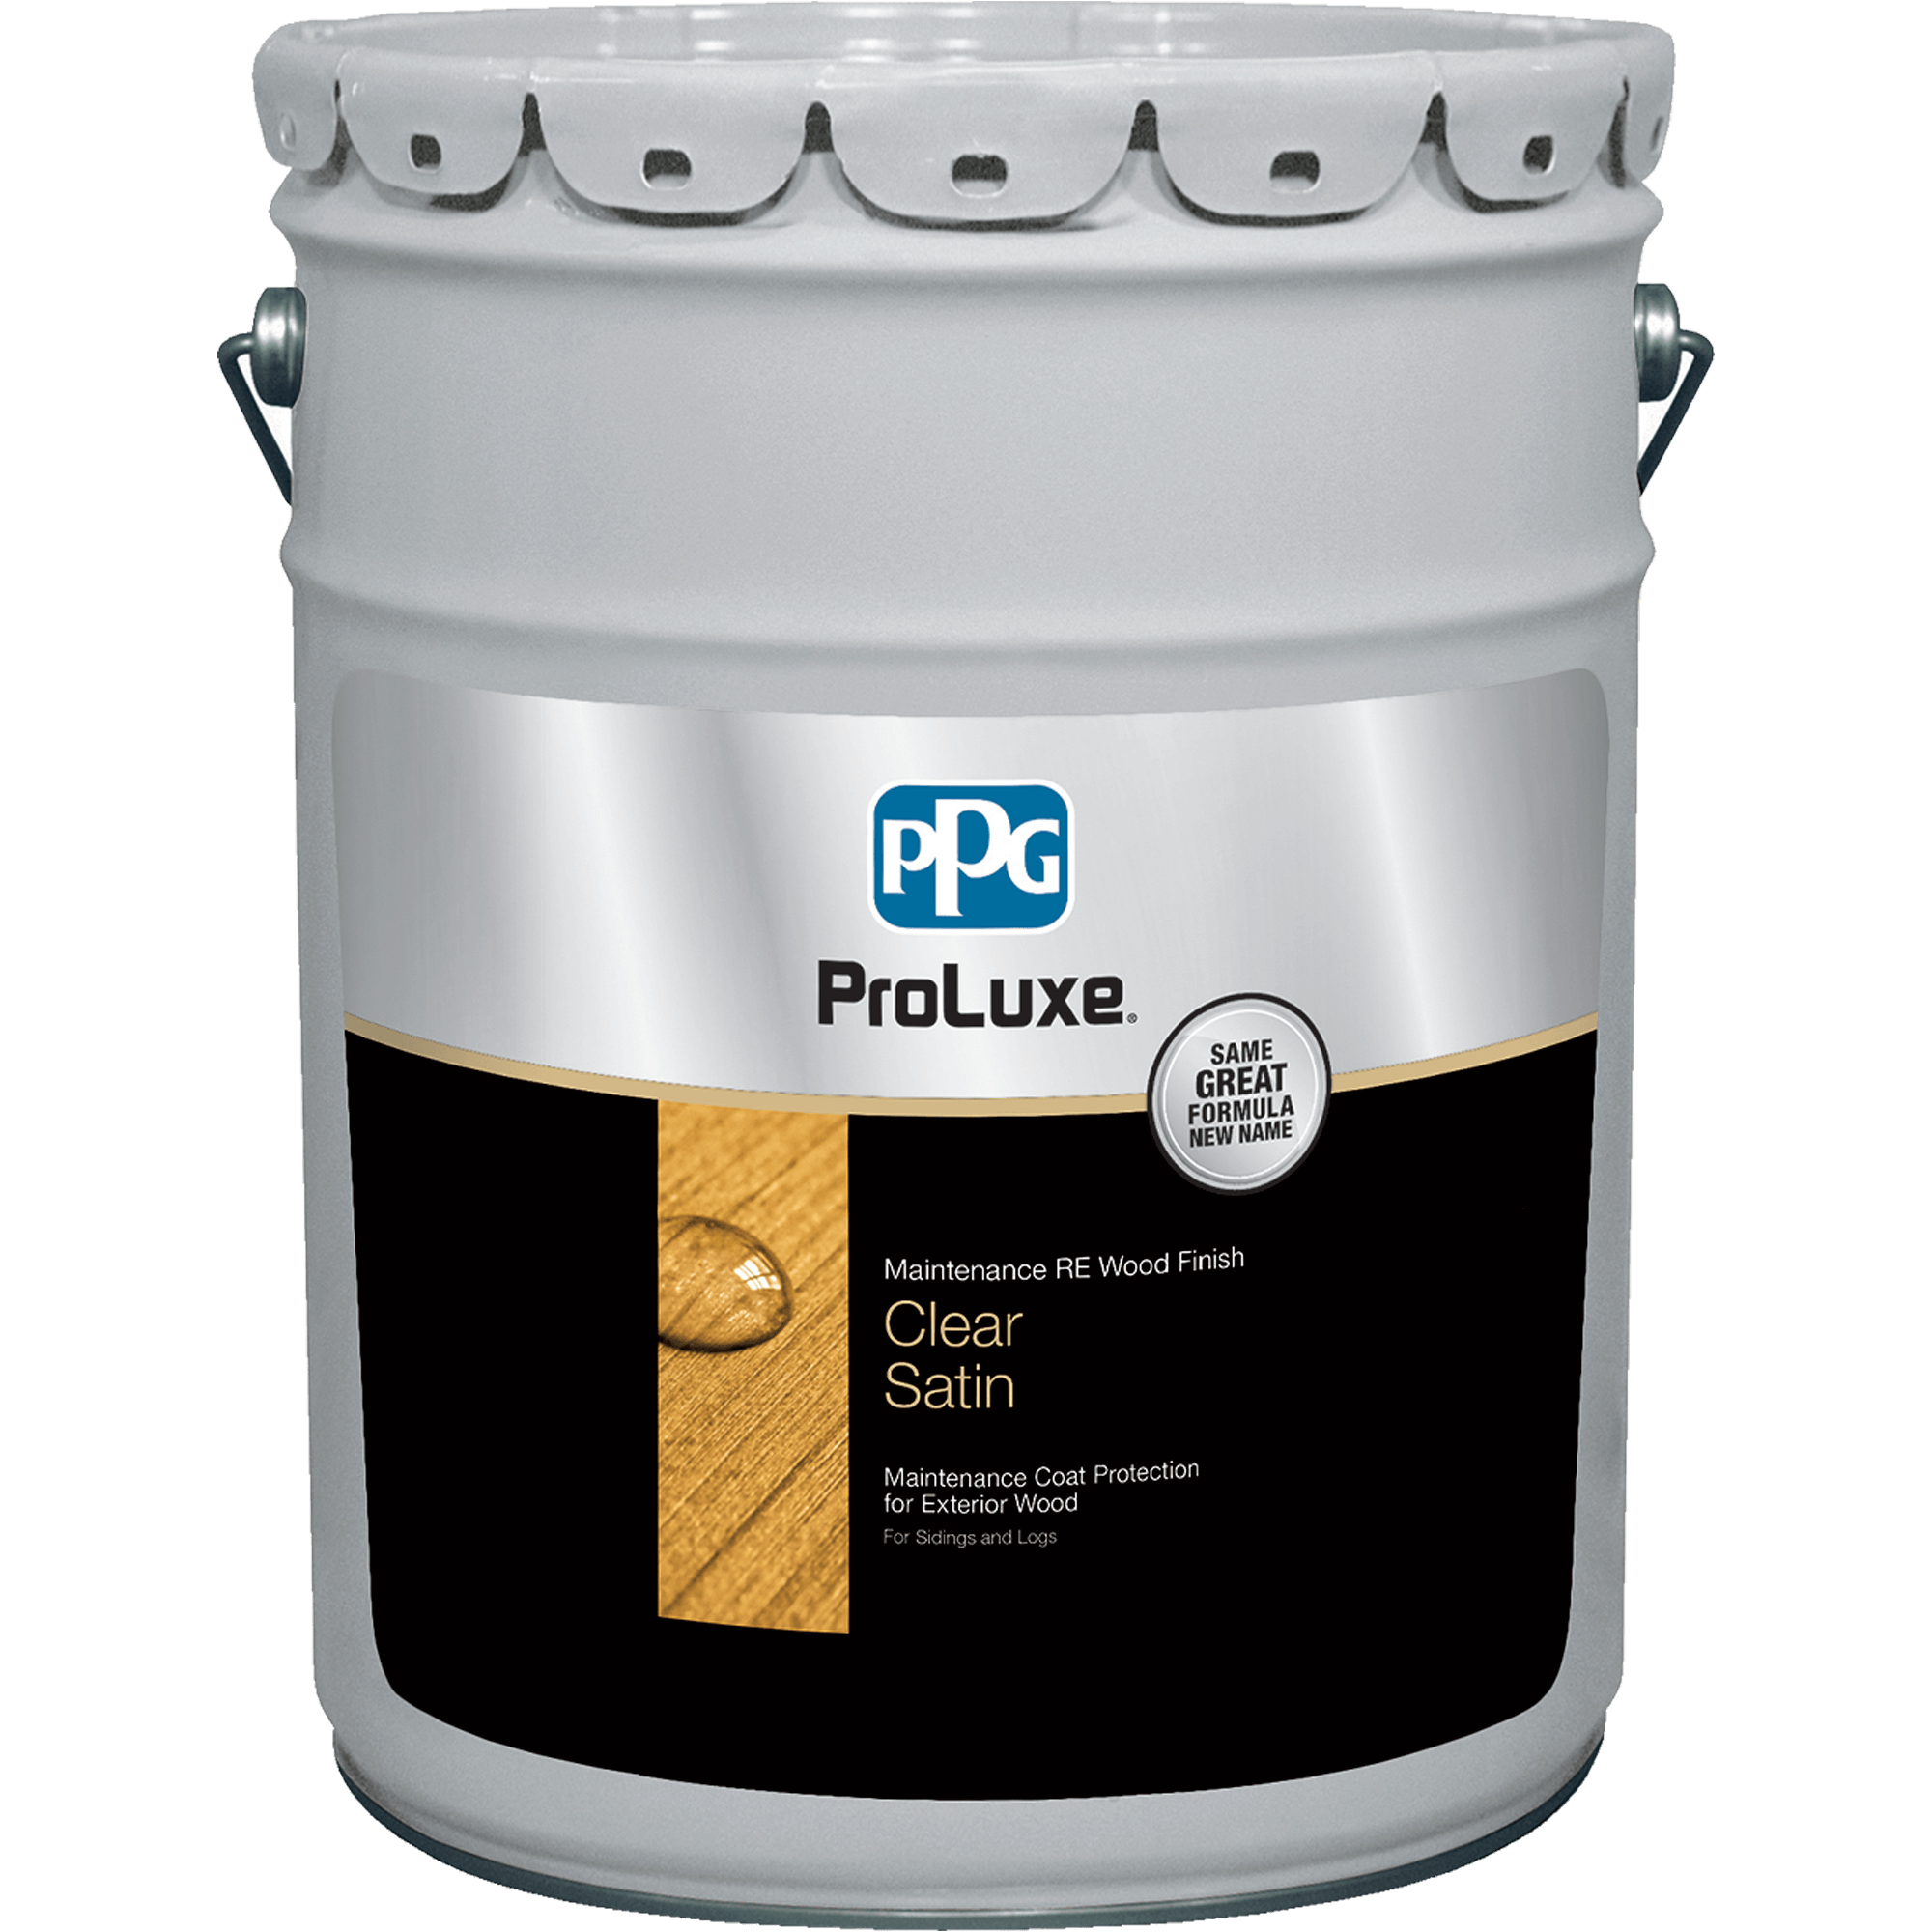  PROLUXE<sup>®</sup> Maintenance RE Wood Finish 5 gallon